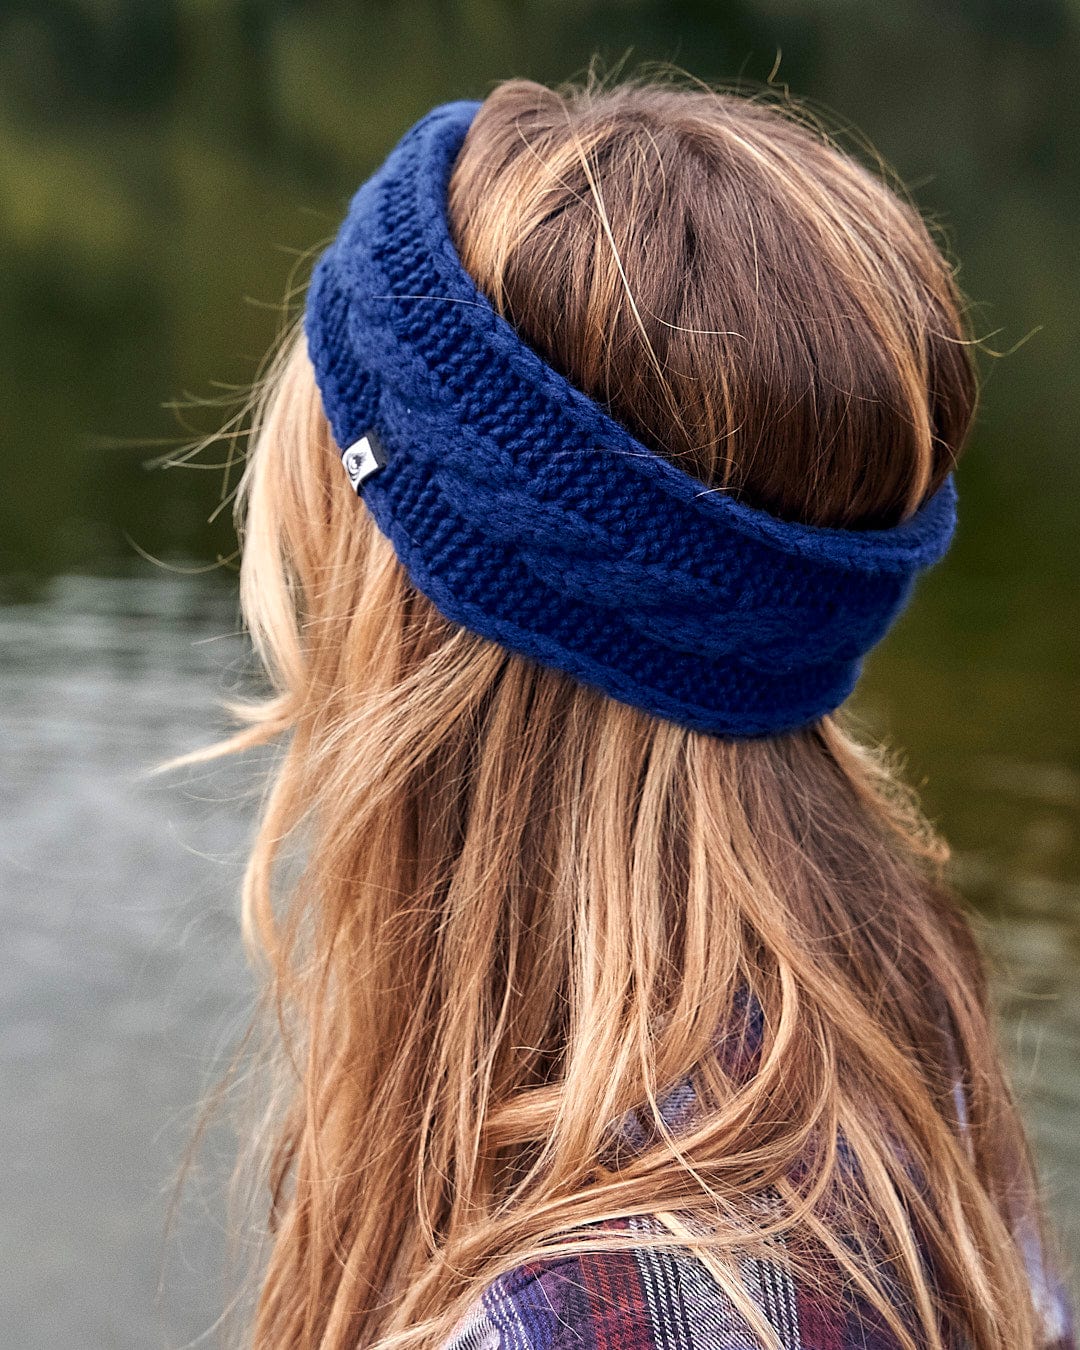 A woman wearing a Saltrock Cable - Knitted Headband - Blue by a lake, showcasing both fashion and warmth.